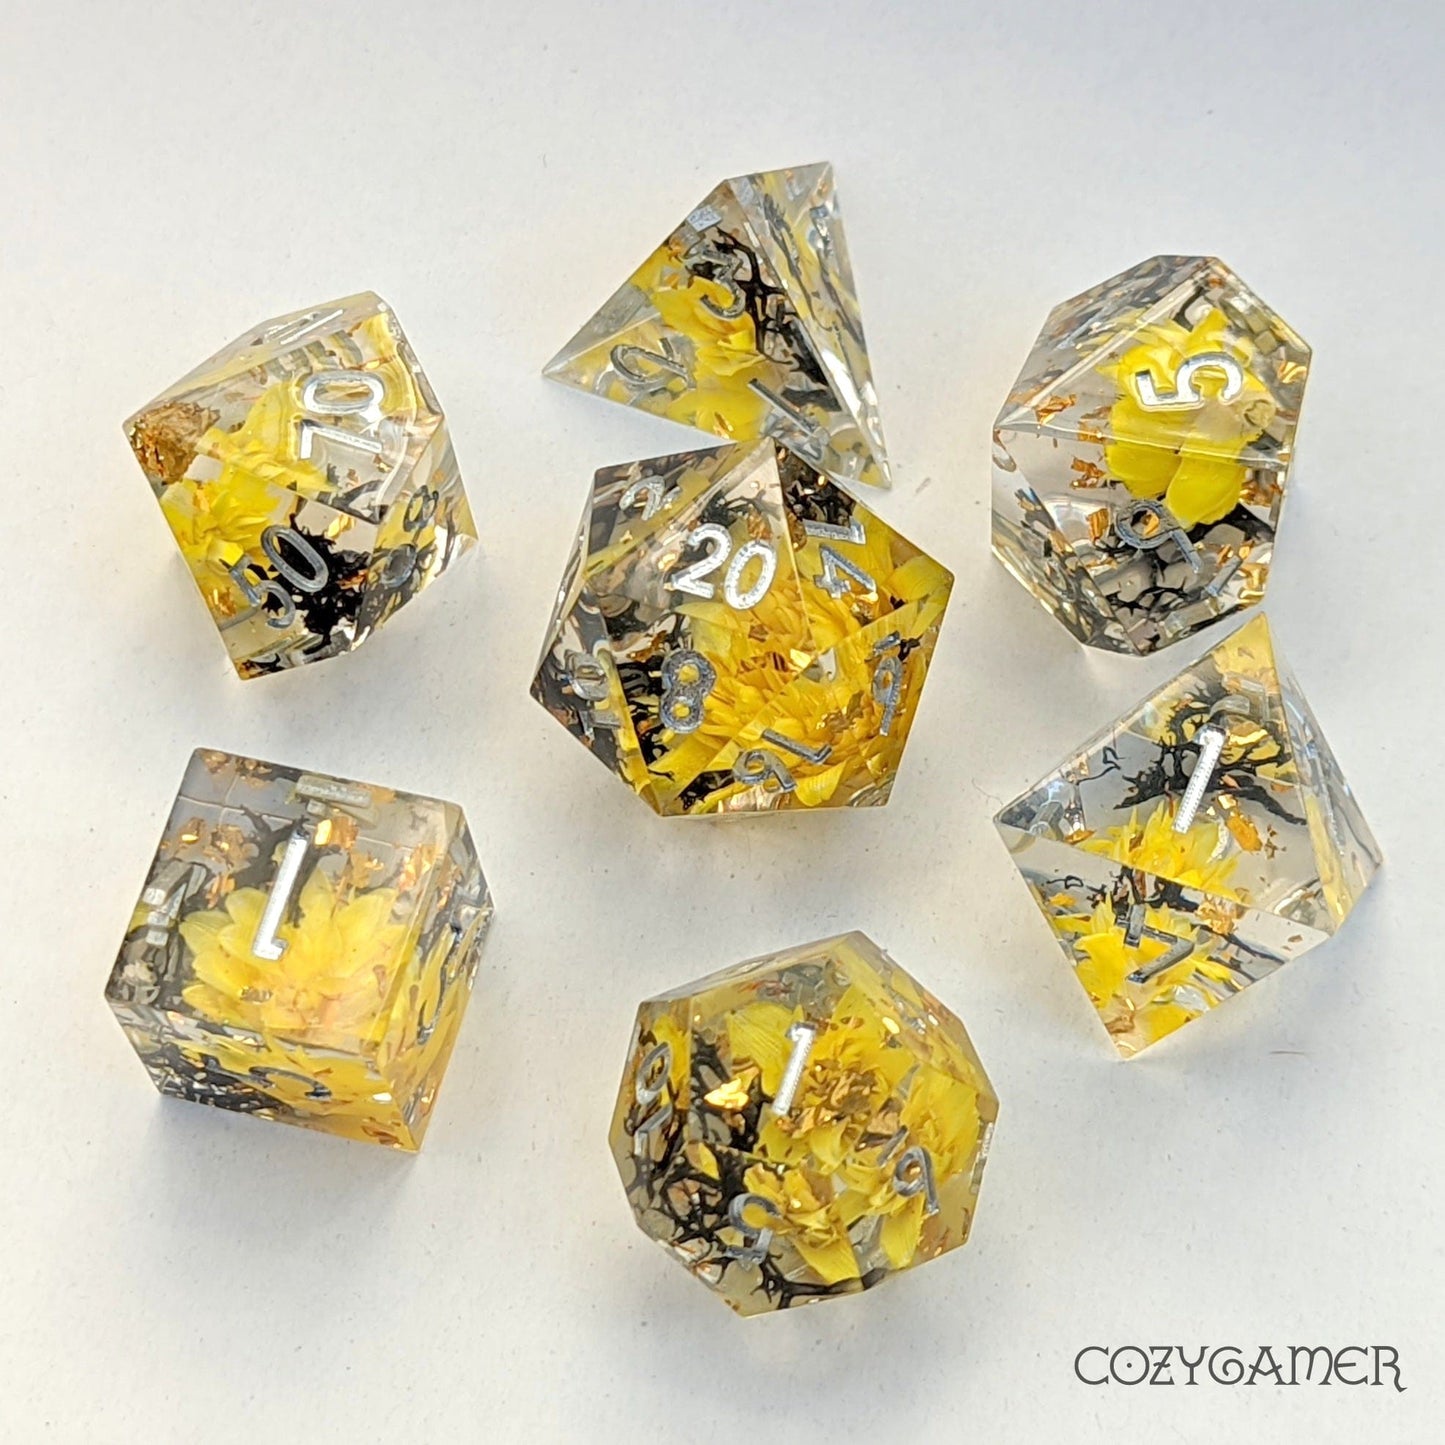 Yellow Flowers and Black Moss Sharp Edge Resin Dice Set. 7 Piece DND dice set with real dried flowers.